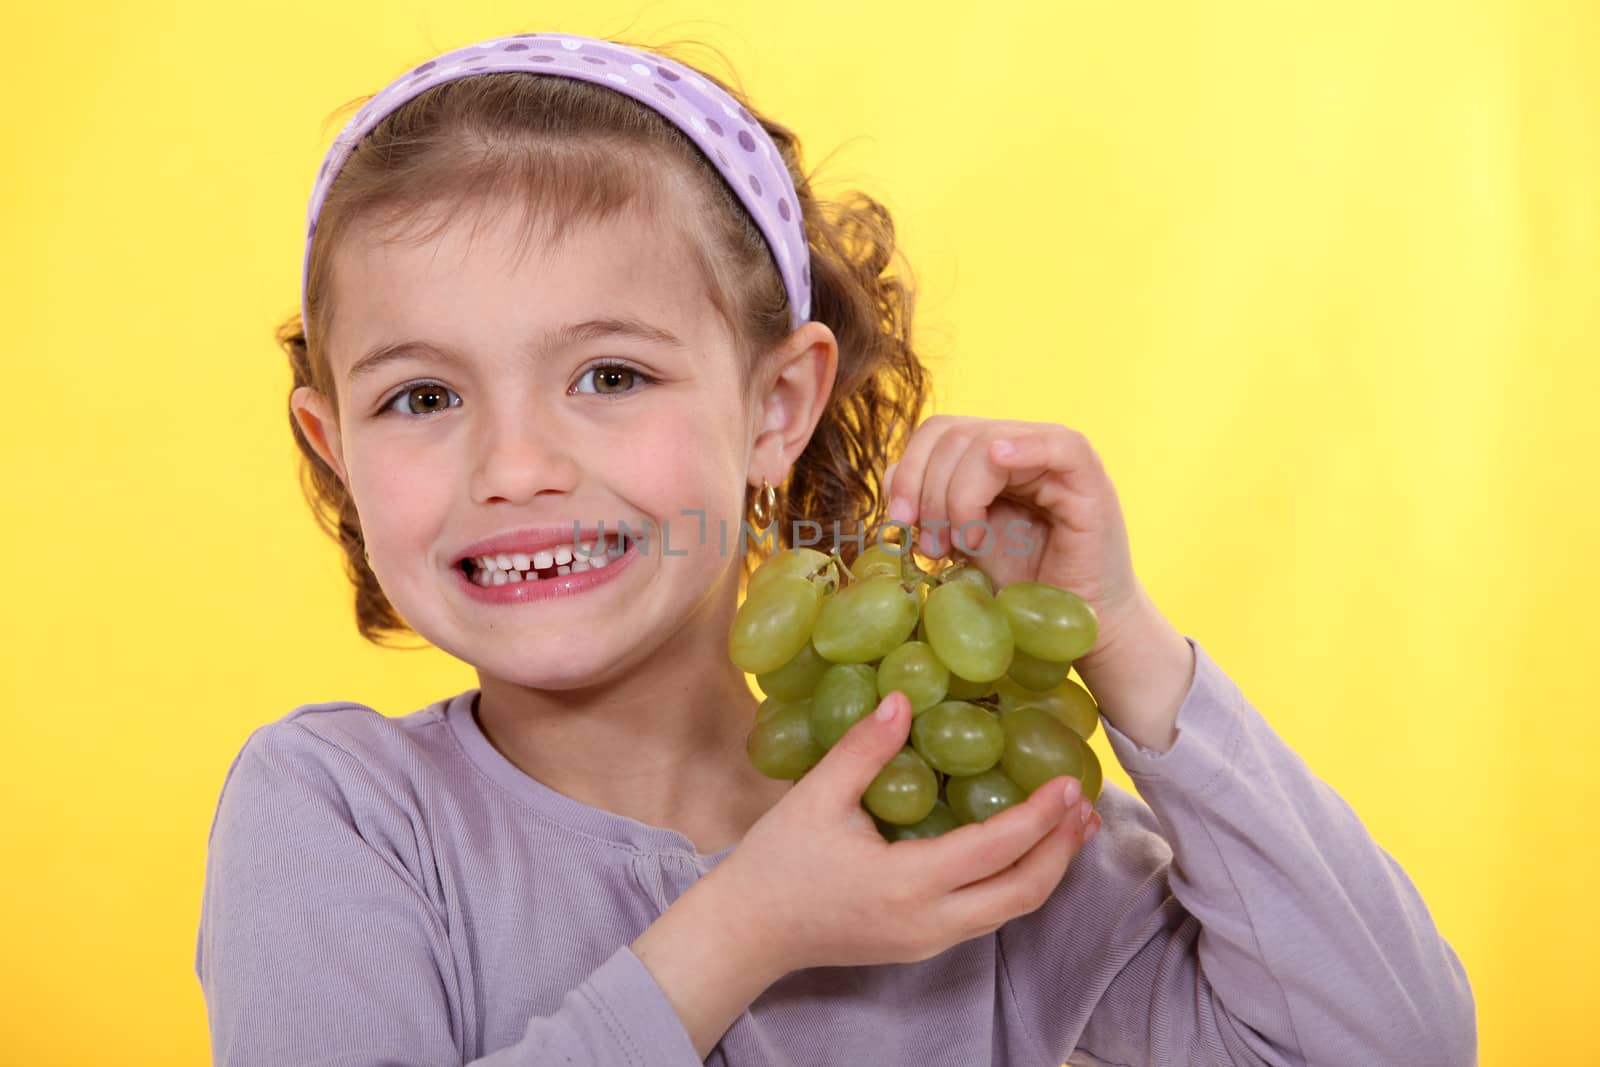 Girl with bunch of grapes by phovoir